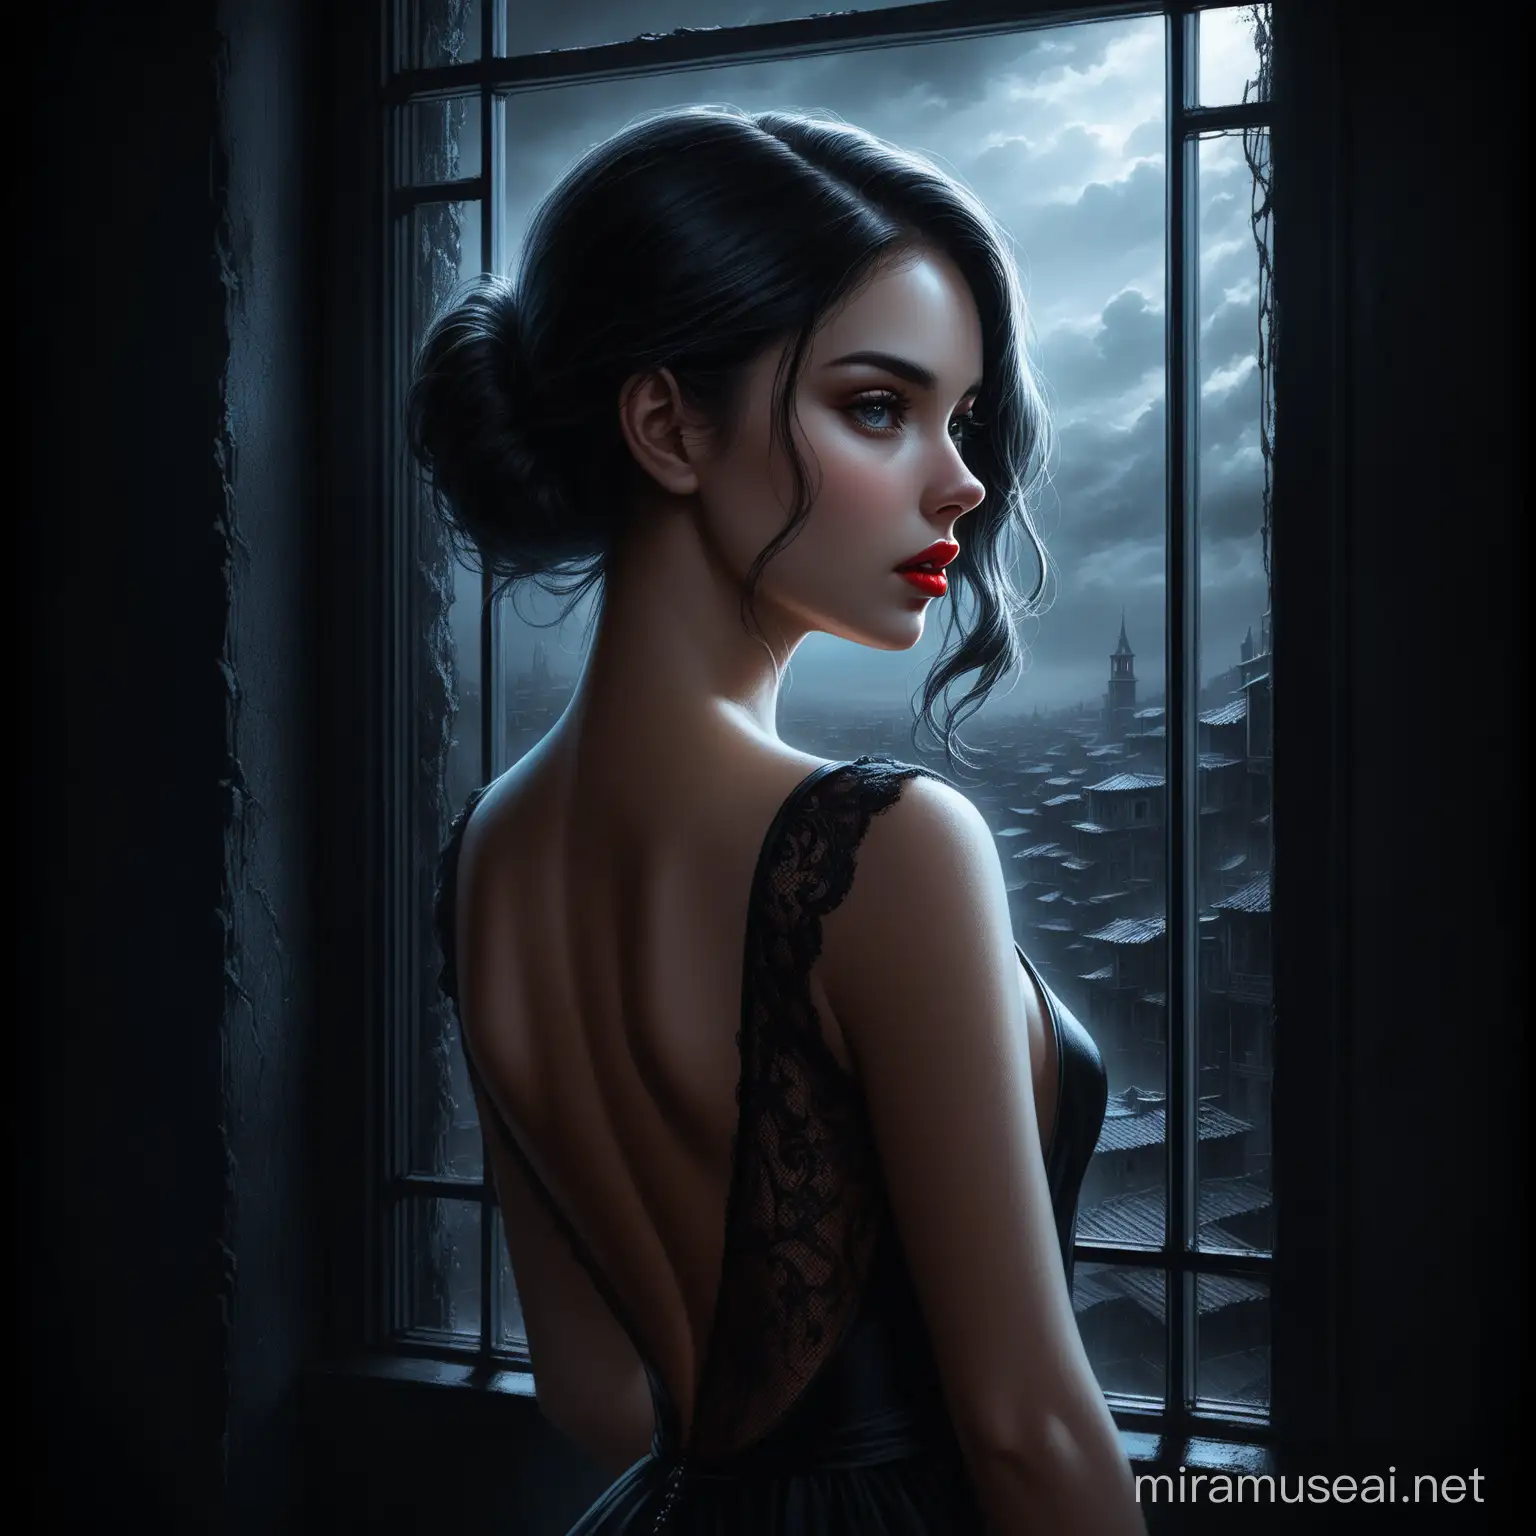  Aivision, neon colors, portrait of a beautiful girl with a dramatic expression holding ,full red lips, she is wearing dress Exposed back in black color , she looks out the window anxiously , dramatic atmosphere , dark and gloomy environment , image realistic , Extremely detailed , intricate , beautiful , fantastic view , elegant , crispy quality Federico Bebber's expressive 